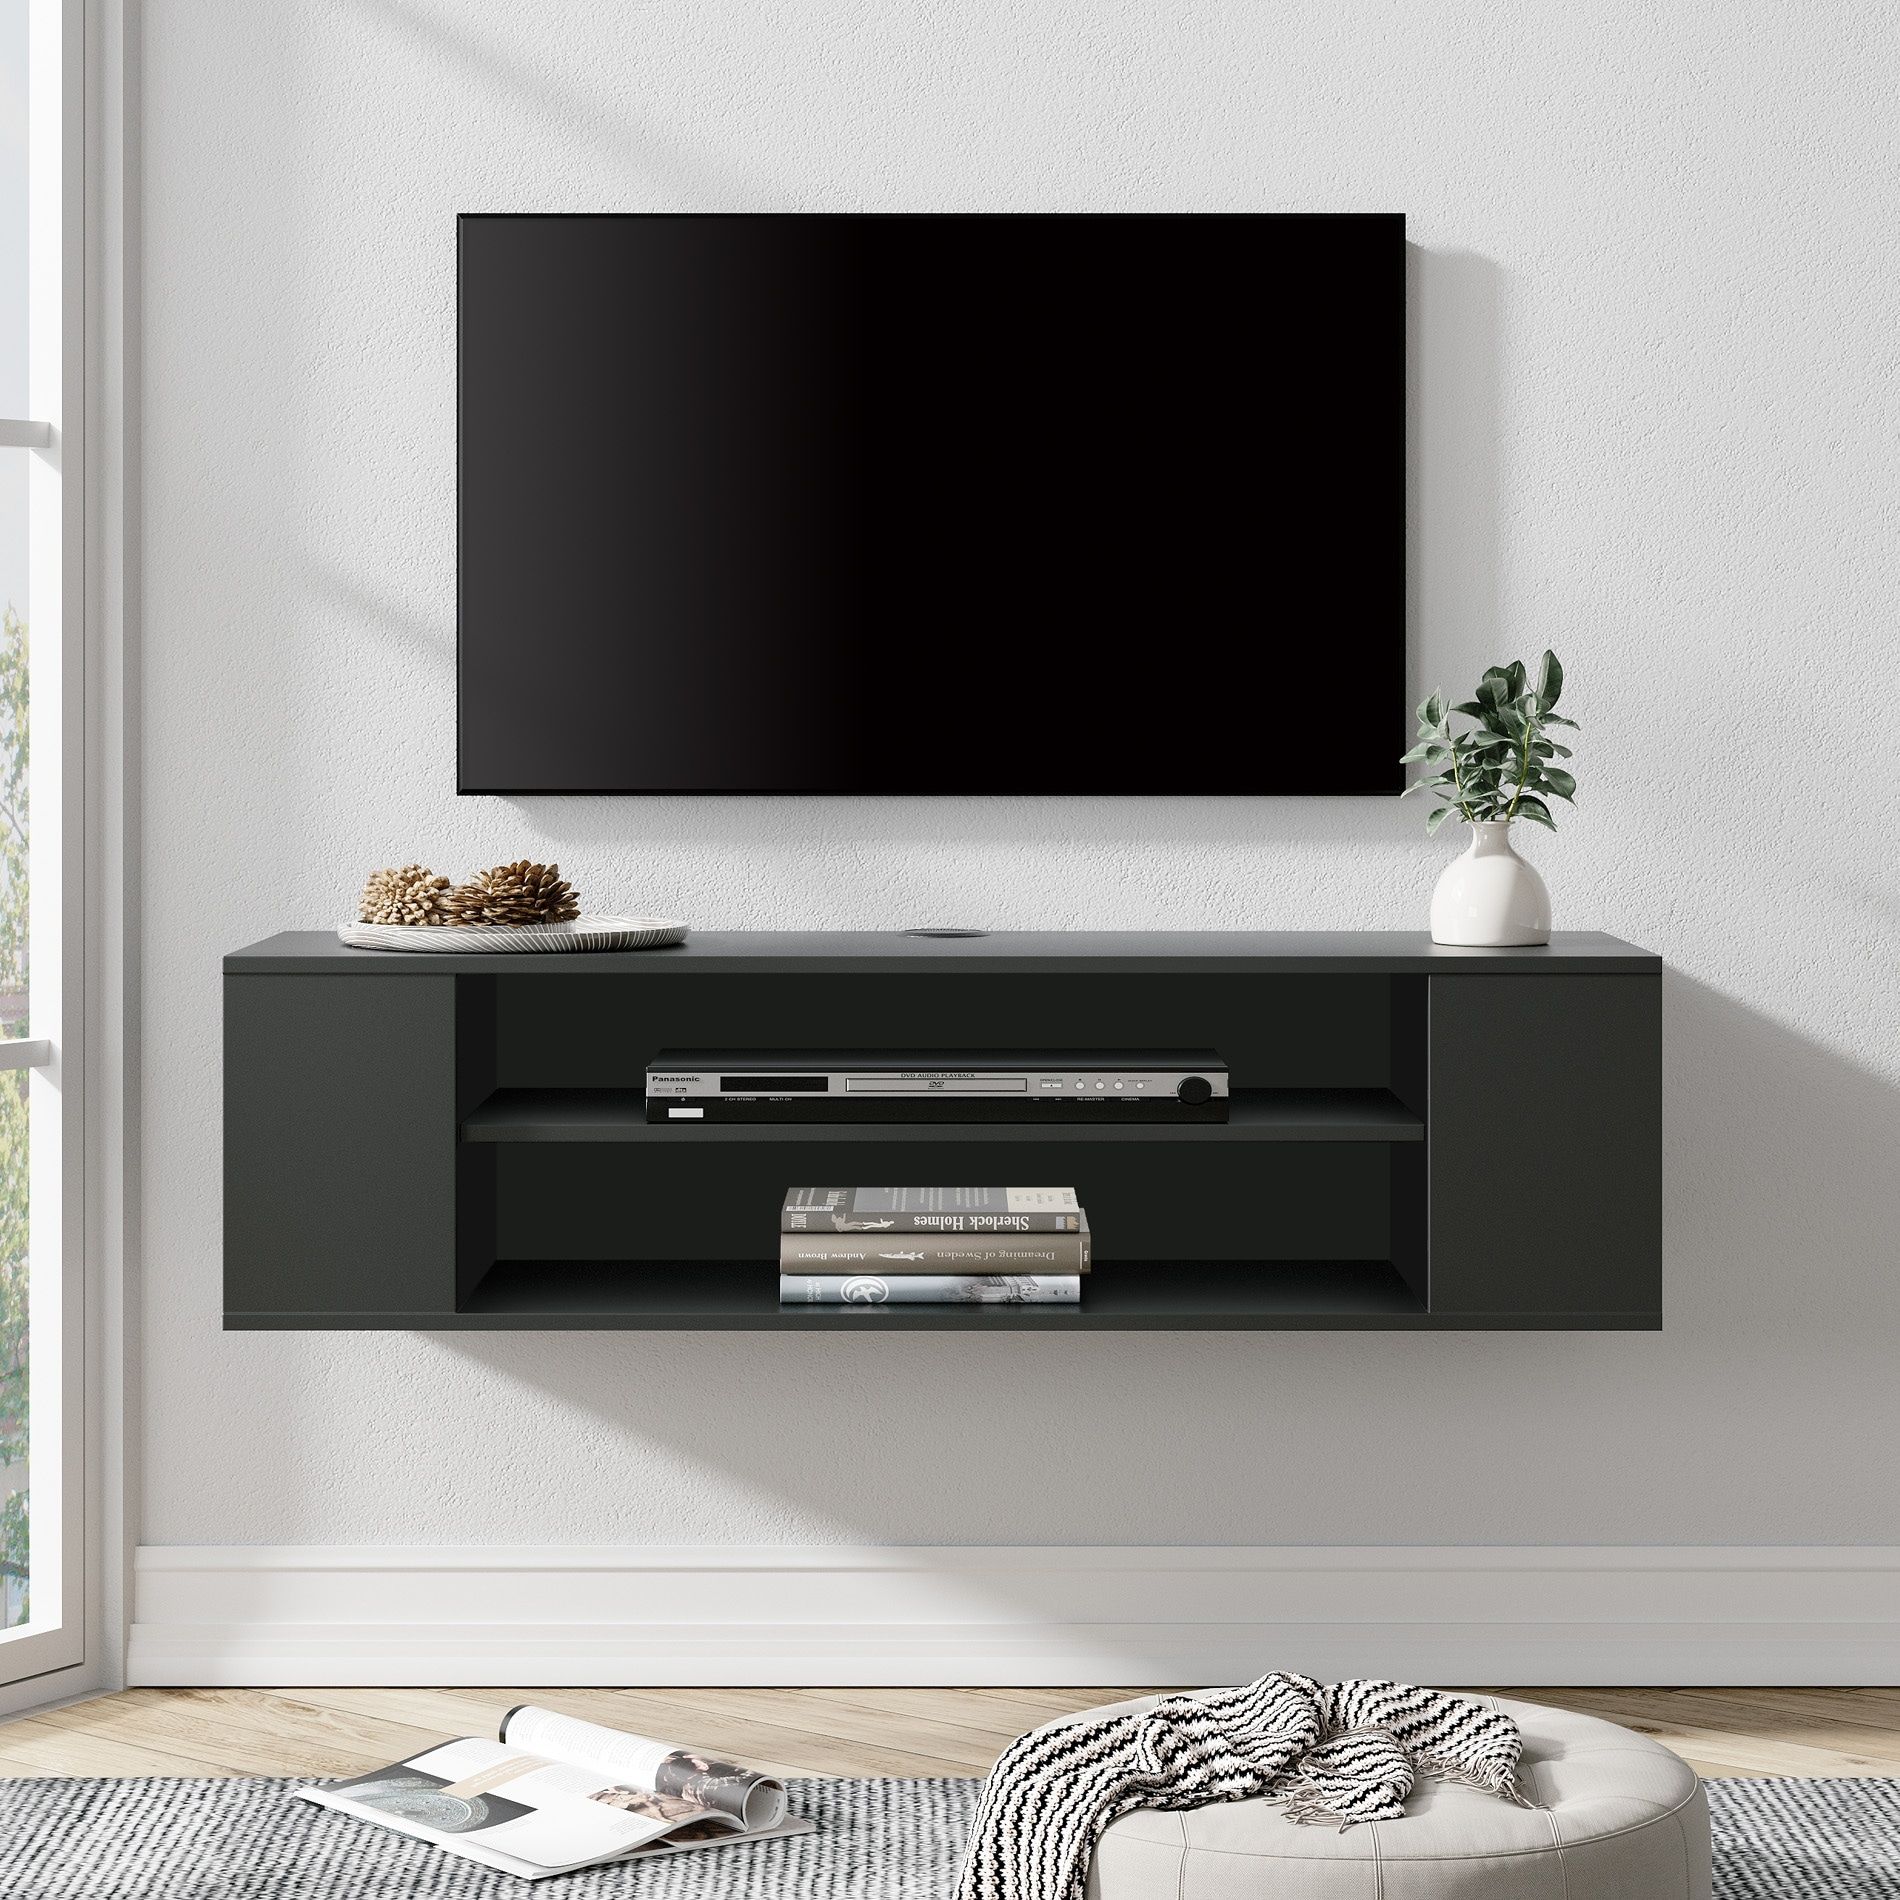 3 Tier Floating Tv Stand With Adjustable Shelves For Living Room, Black –  On Sale – Bed Bath & Beyond – 37782549 Pertaining To Tier Stands For Tvs (View 8 of 15)